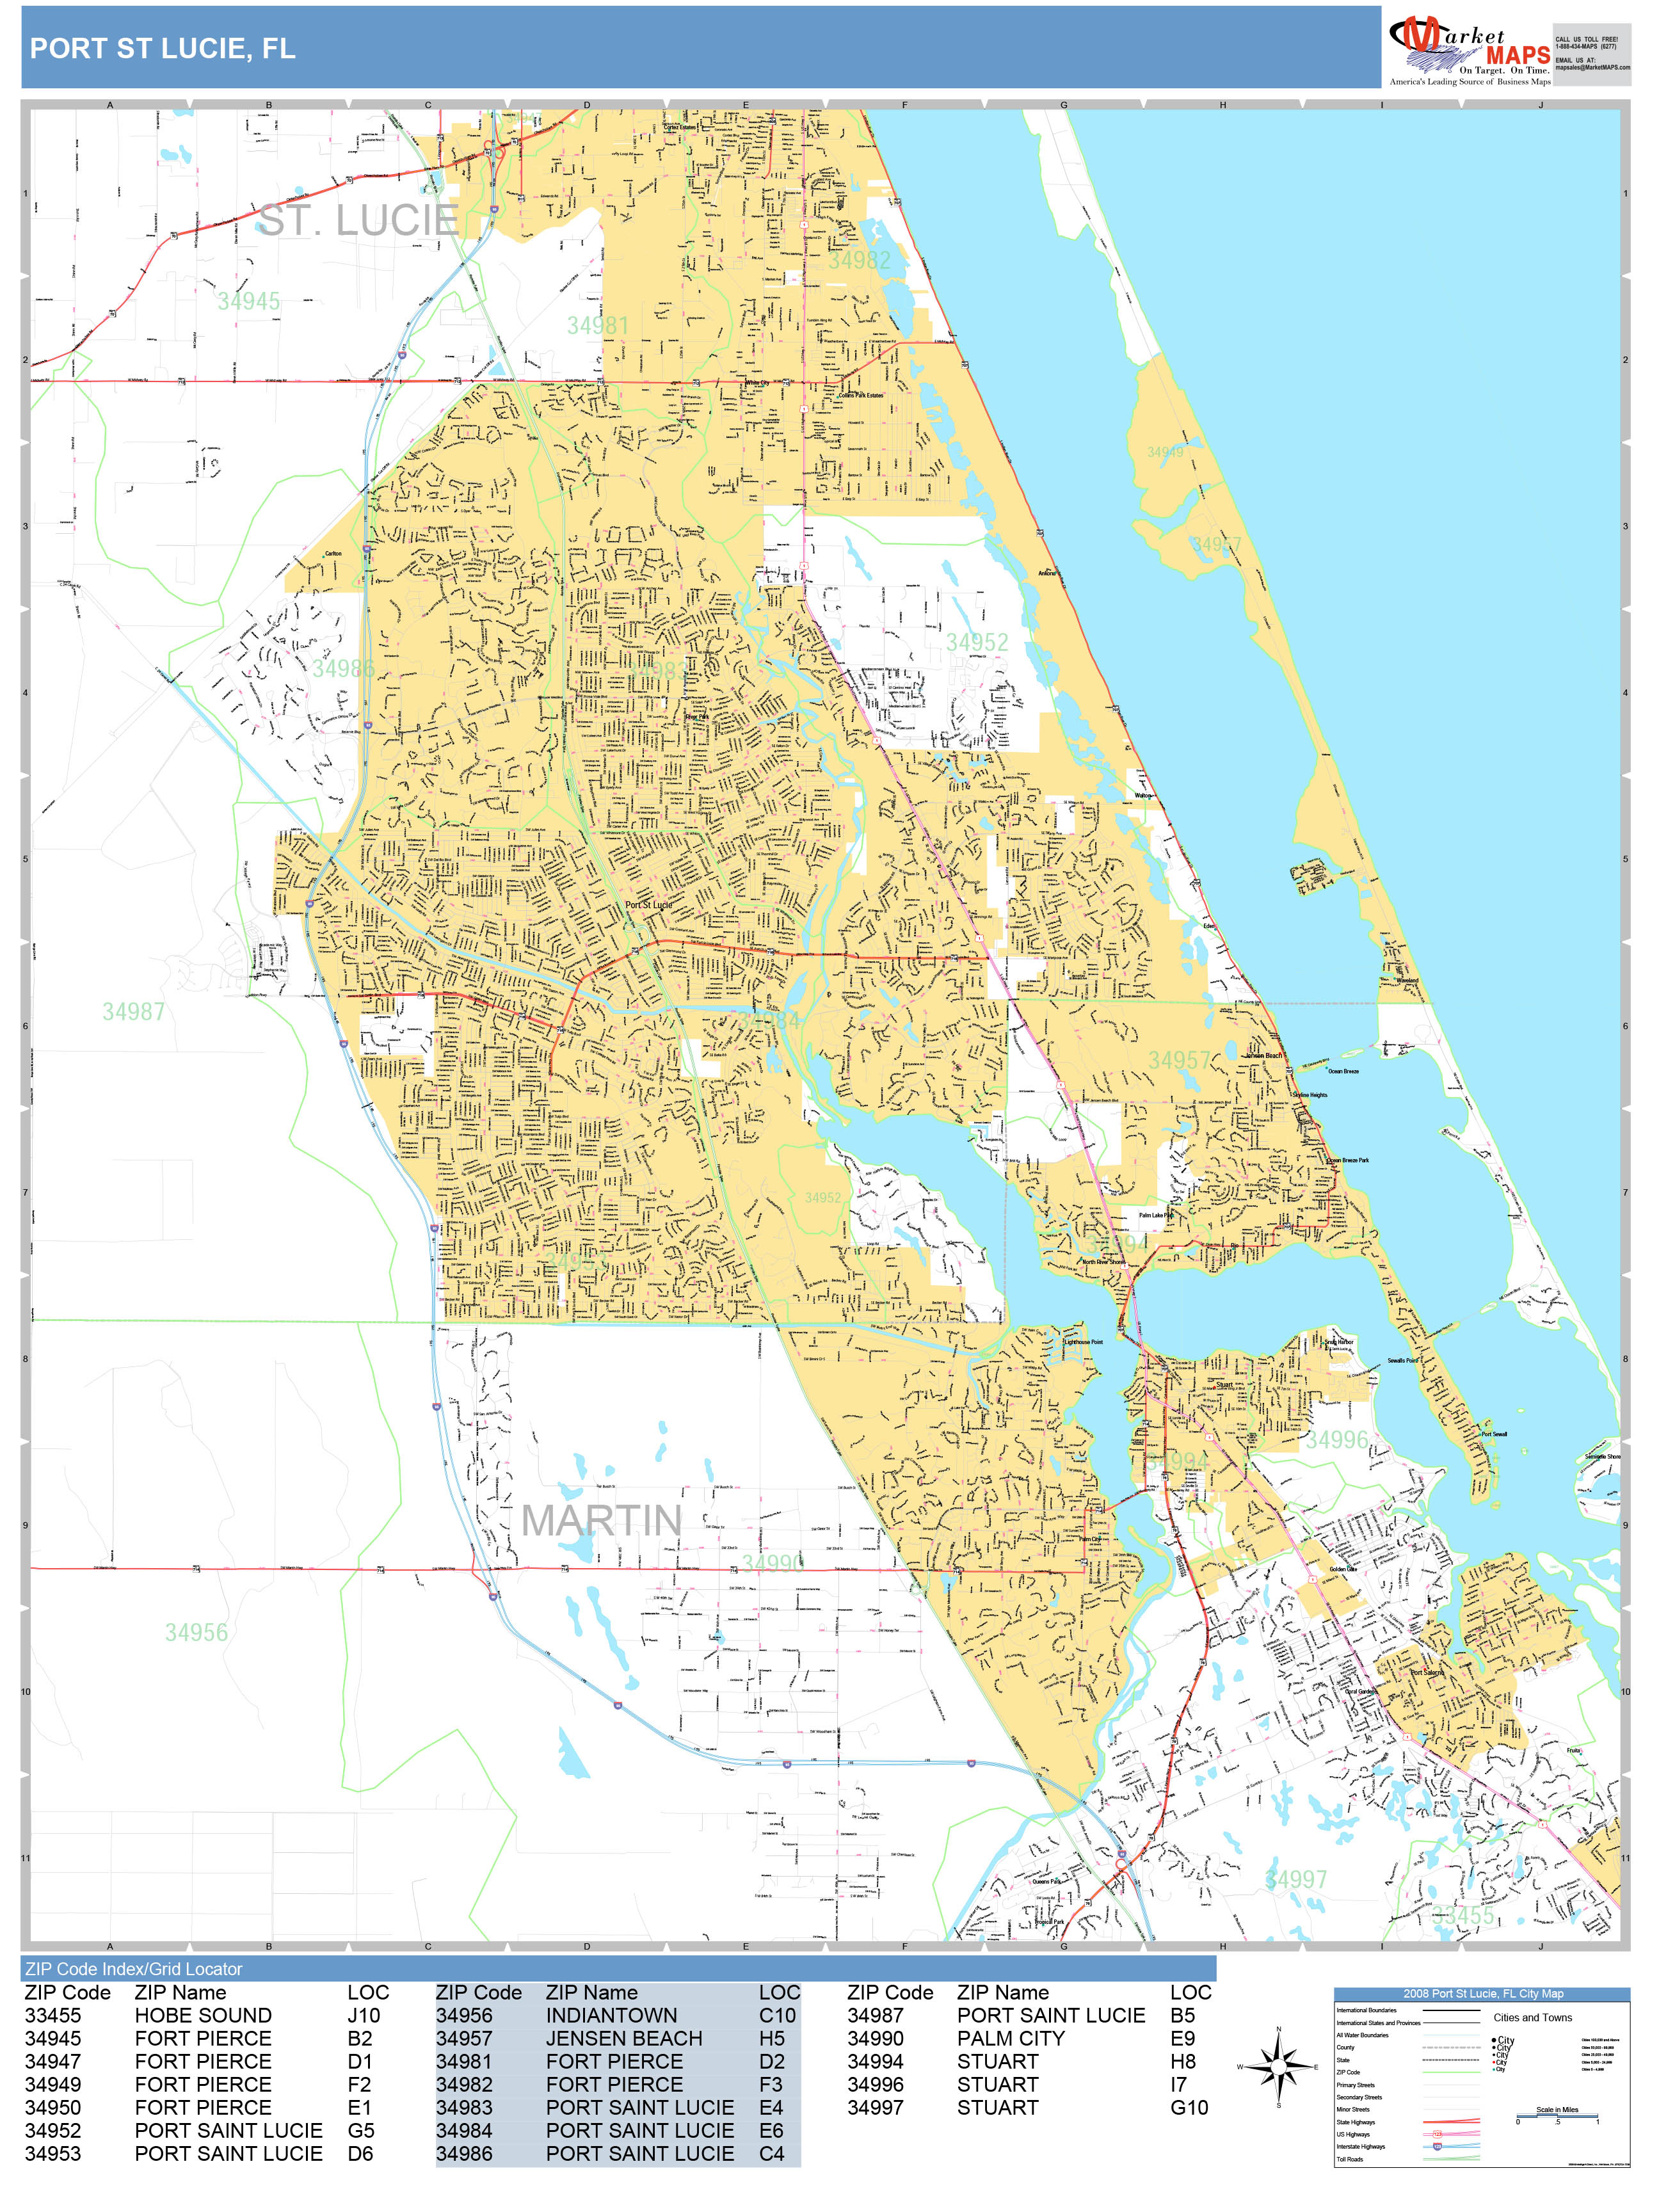 Port St. Lucie Florida Wall Map (Basic Style) by MarketMAPS